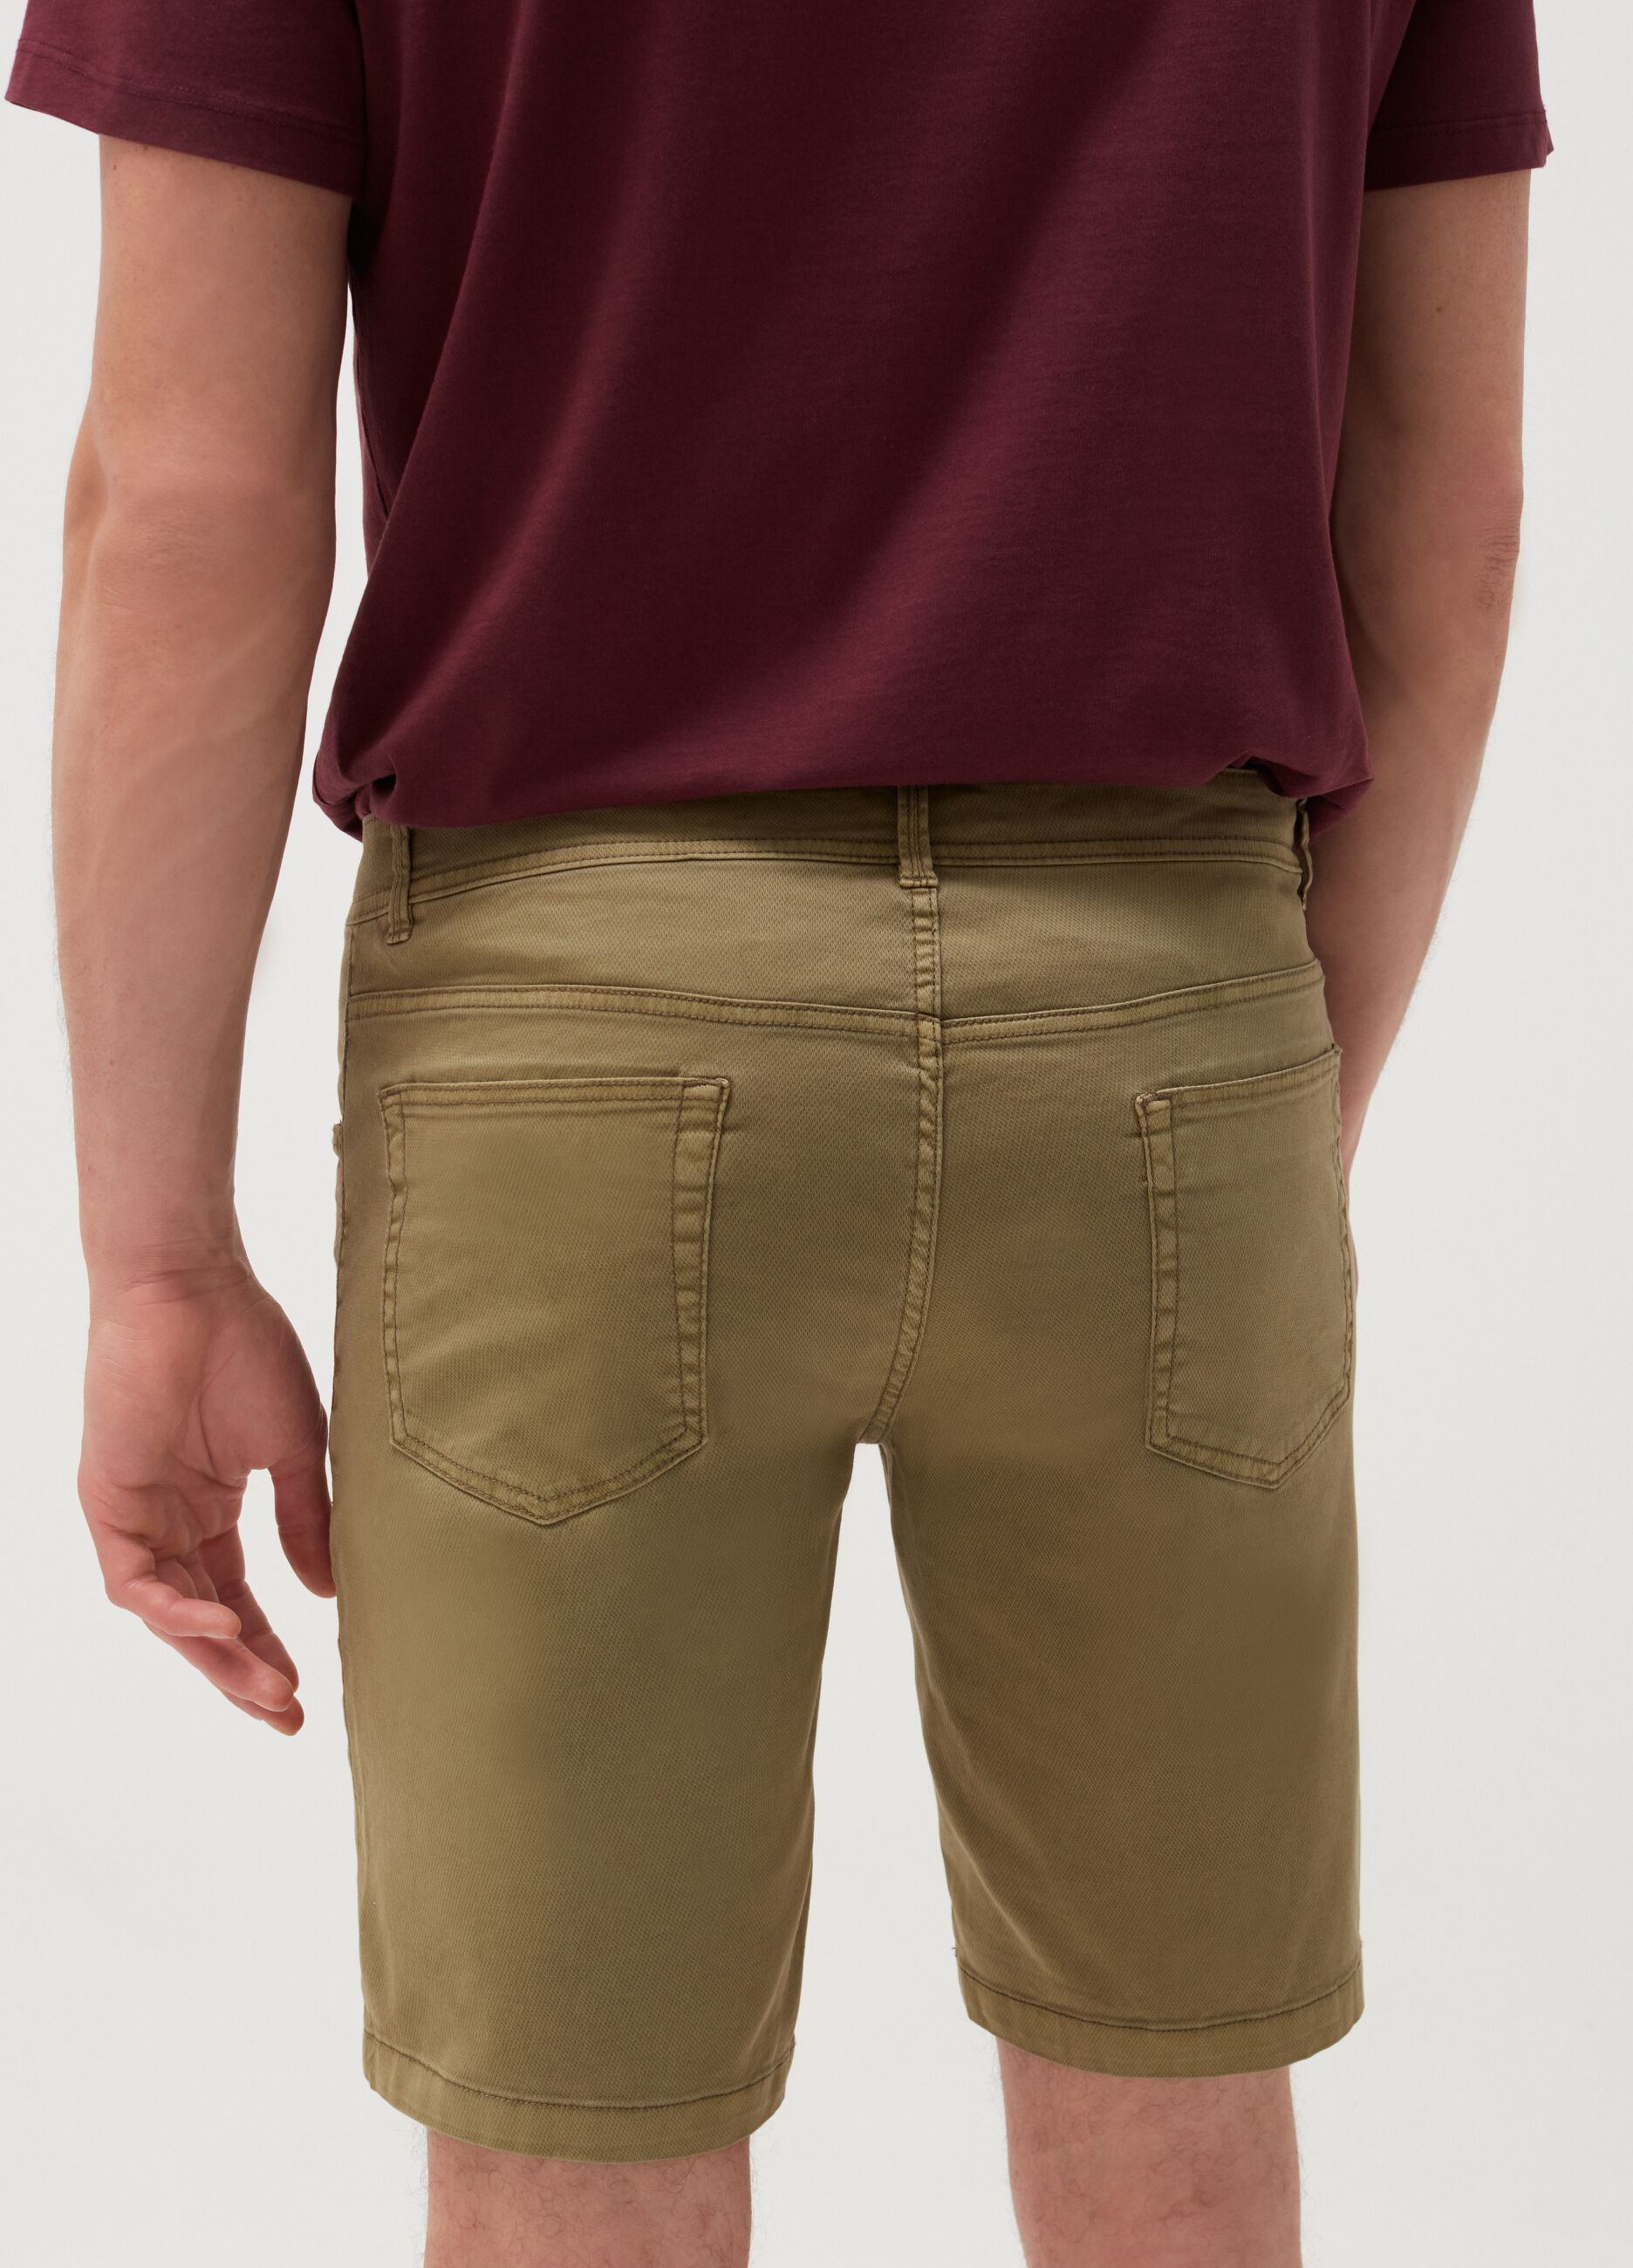 Five-pocket Bermuda shorts in charmeuse-weave cotton